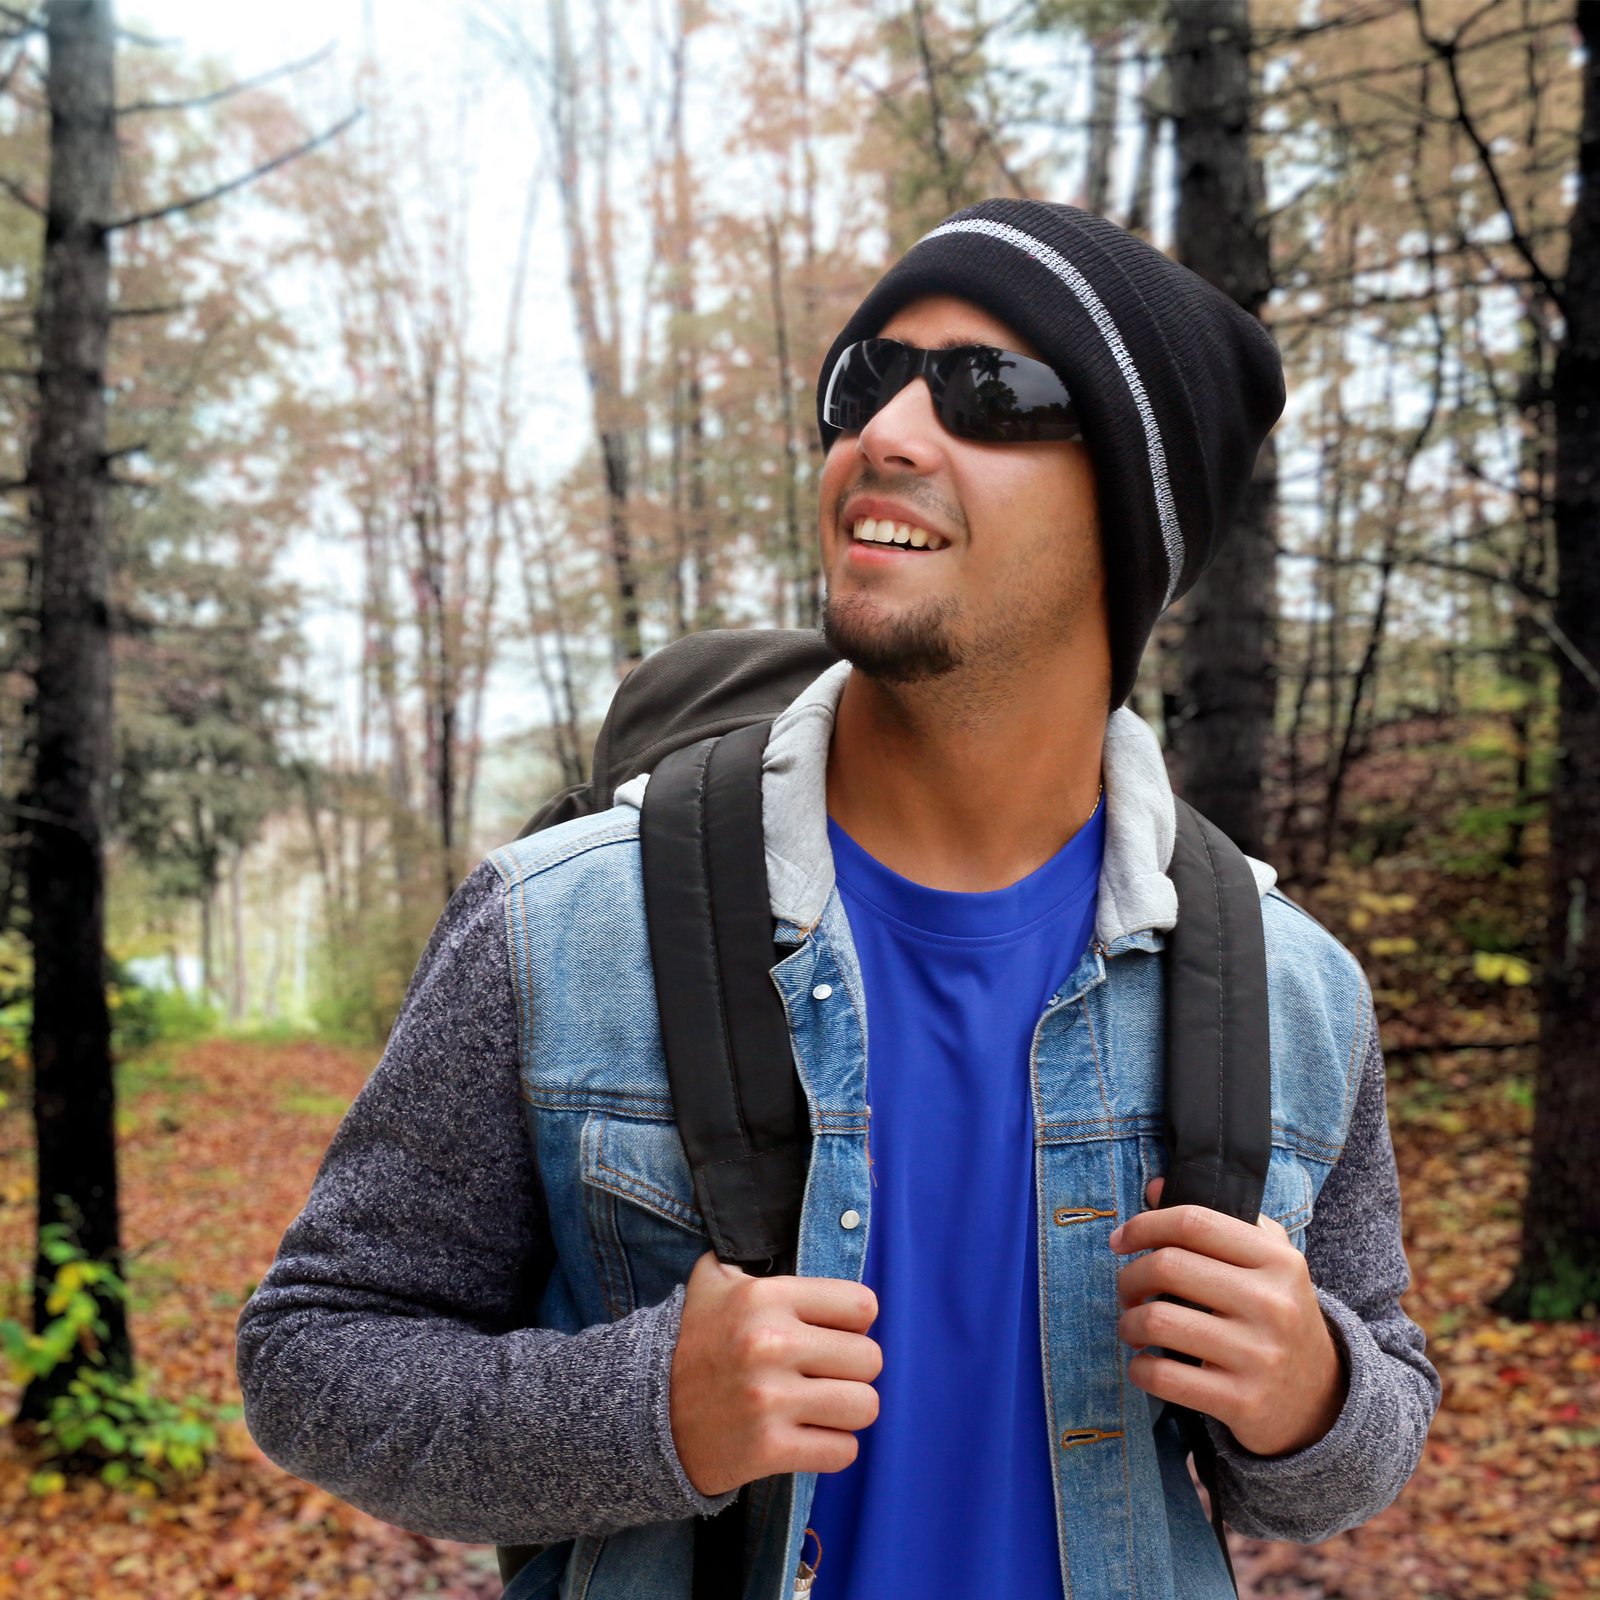 A man wearing the black beanie with reflective stripes while highking in the woods with a back pack and a warm jacket